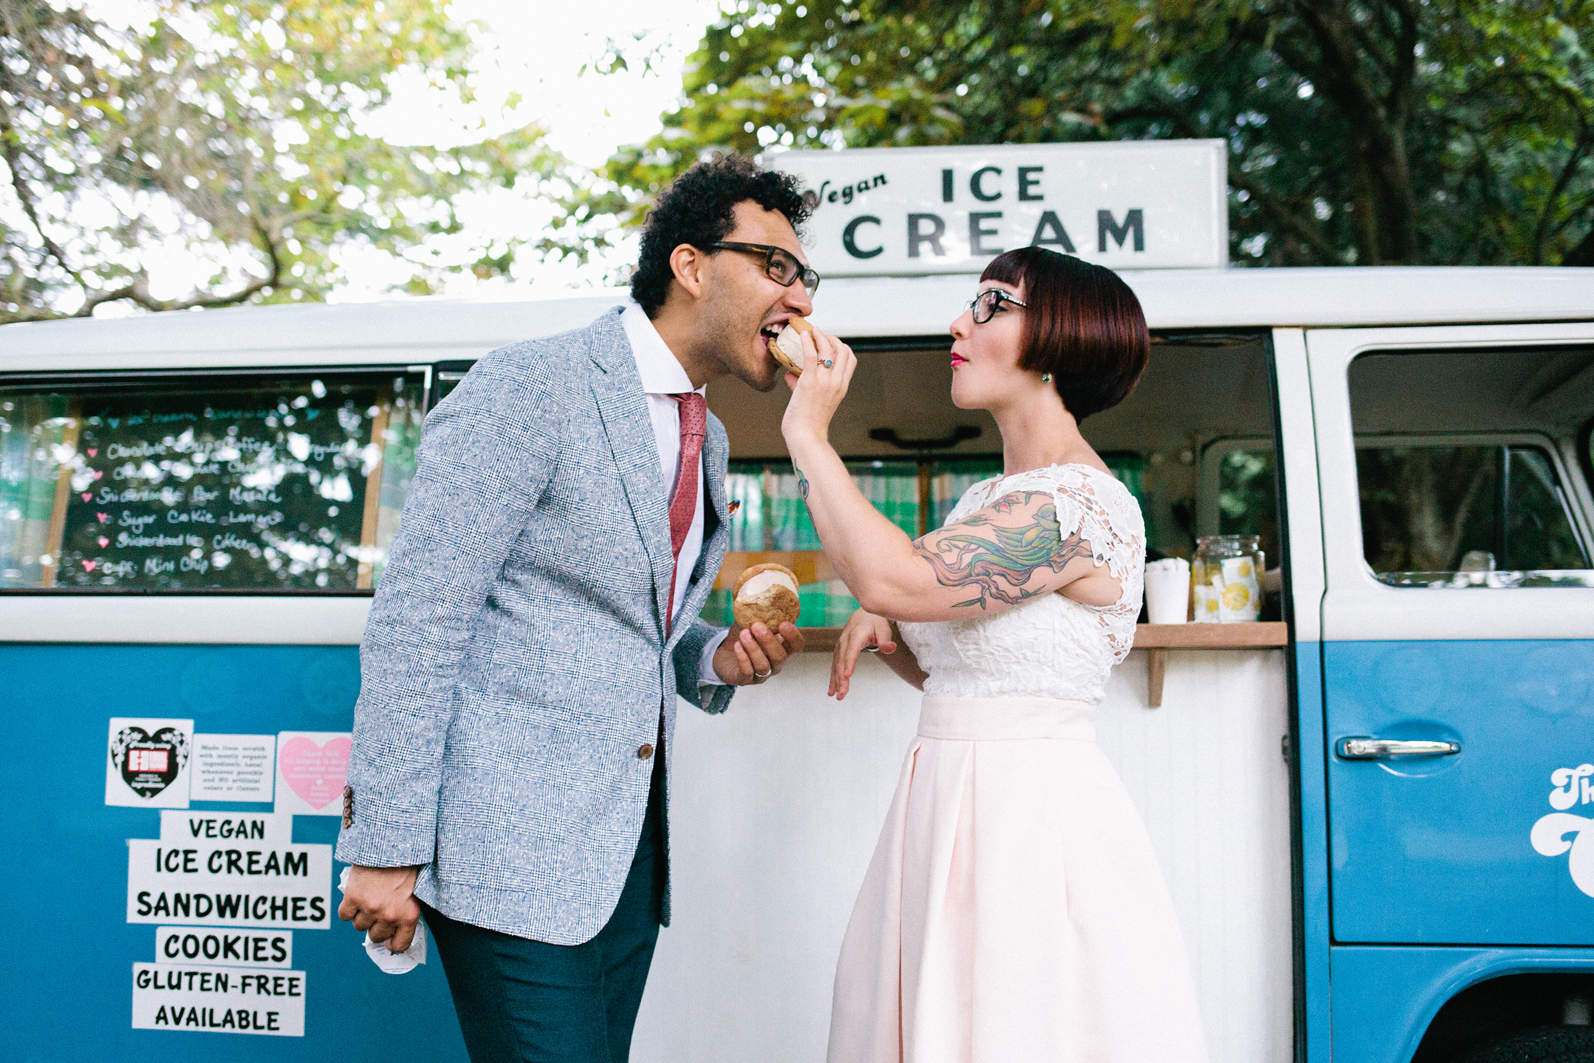 Ice Cream Cookie service from Seattle Cookie Counter at a Volunteer Park Conservatory Elopement.